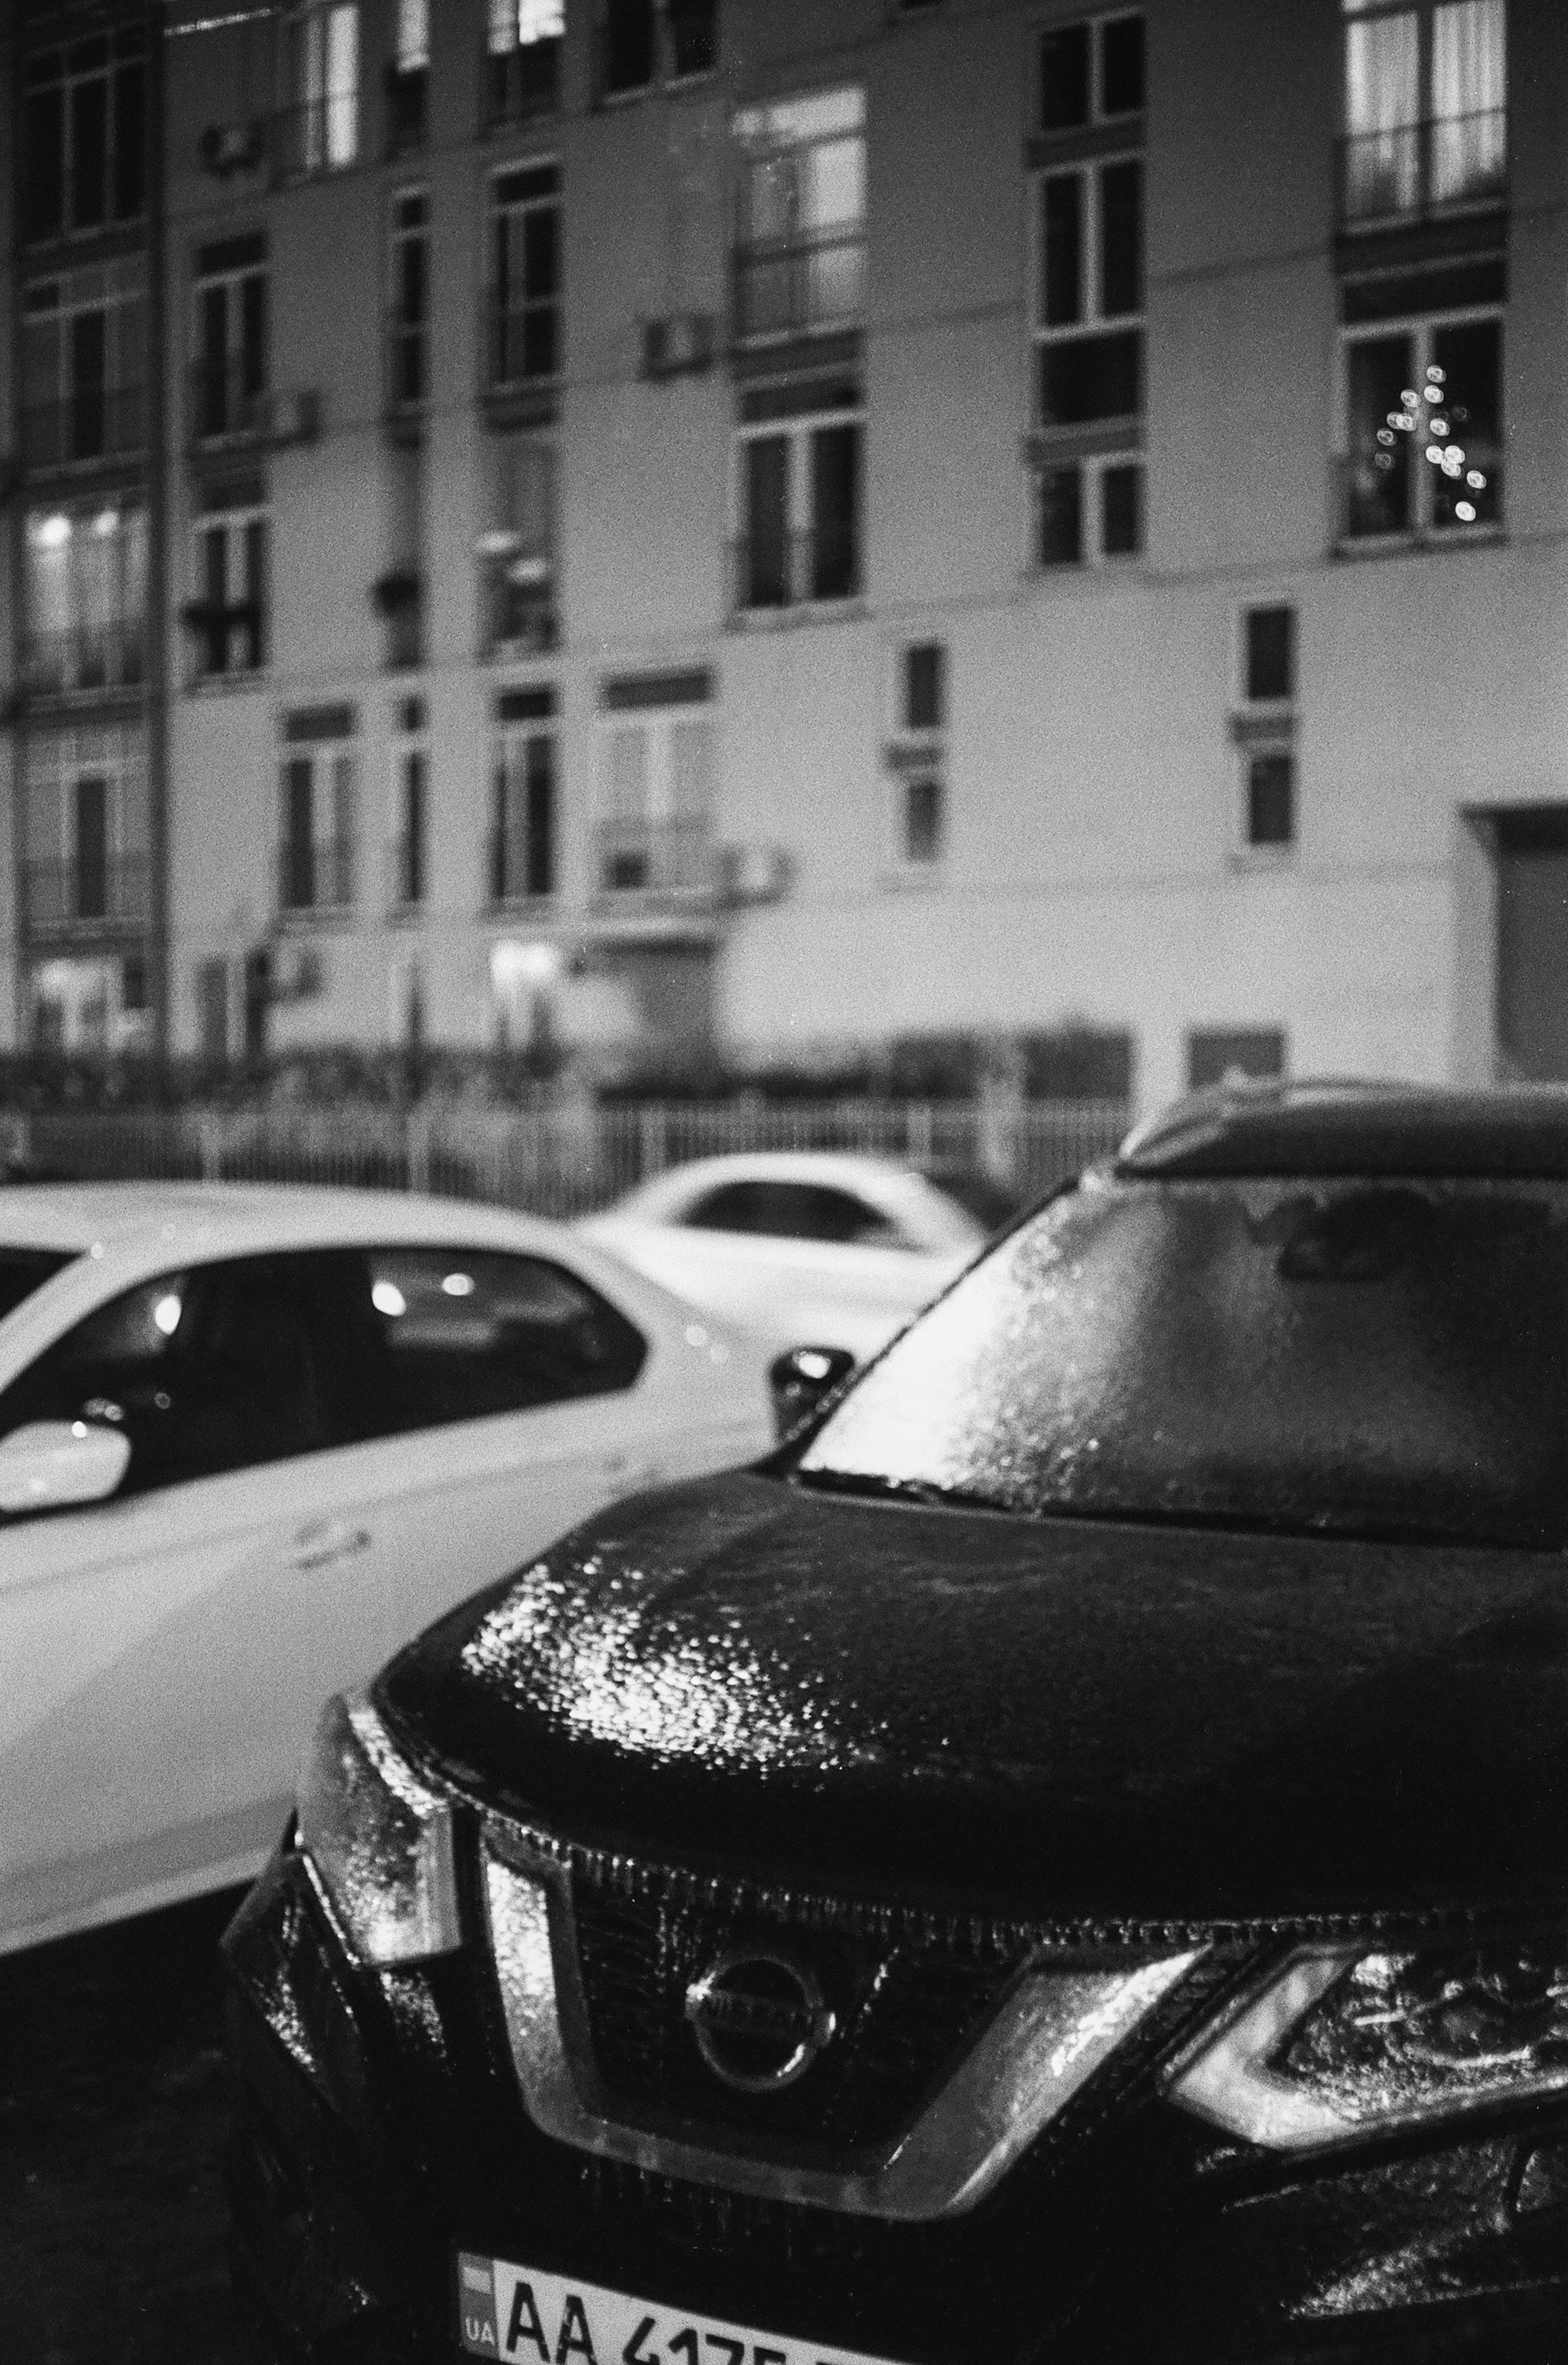 grayscale photo of cars parked on street